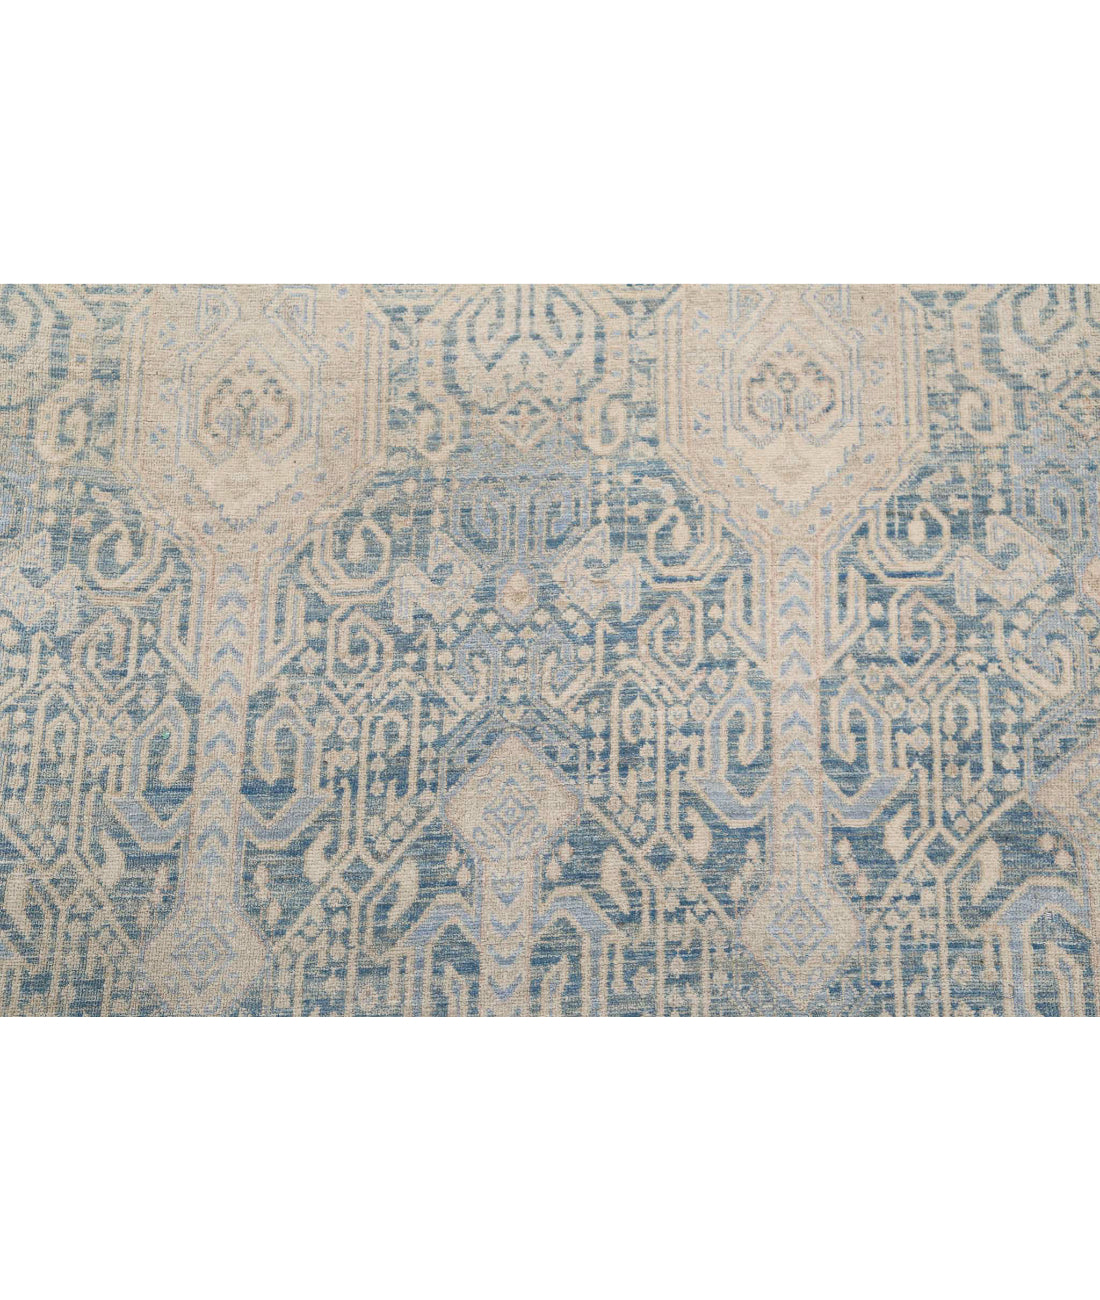 Hand Knotted Fine Artemix Wool Rug - 7'11'' x 10'4'' 7'11'' x 10'4'' (238 X 310) / Blue / Ivory